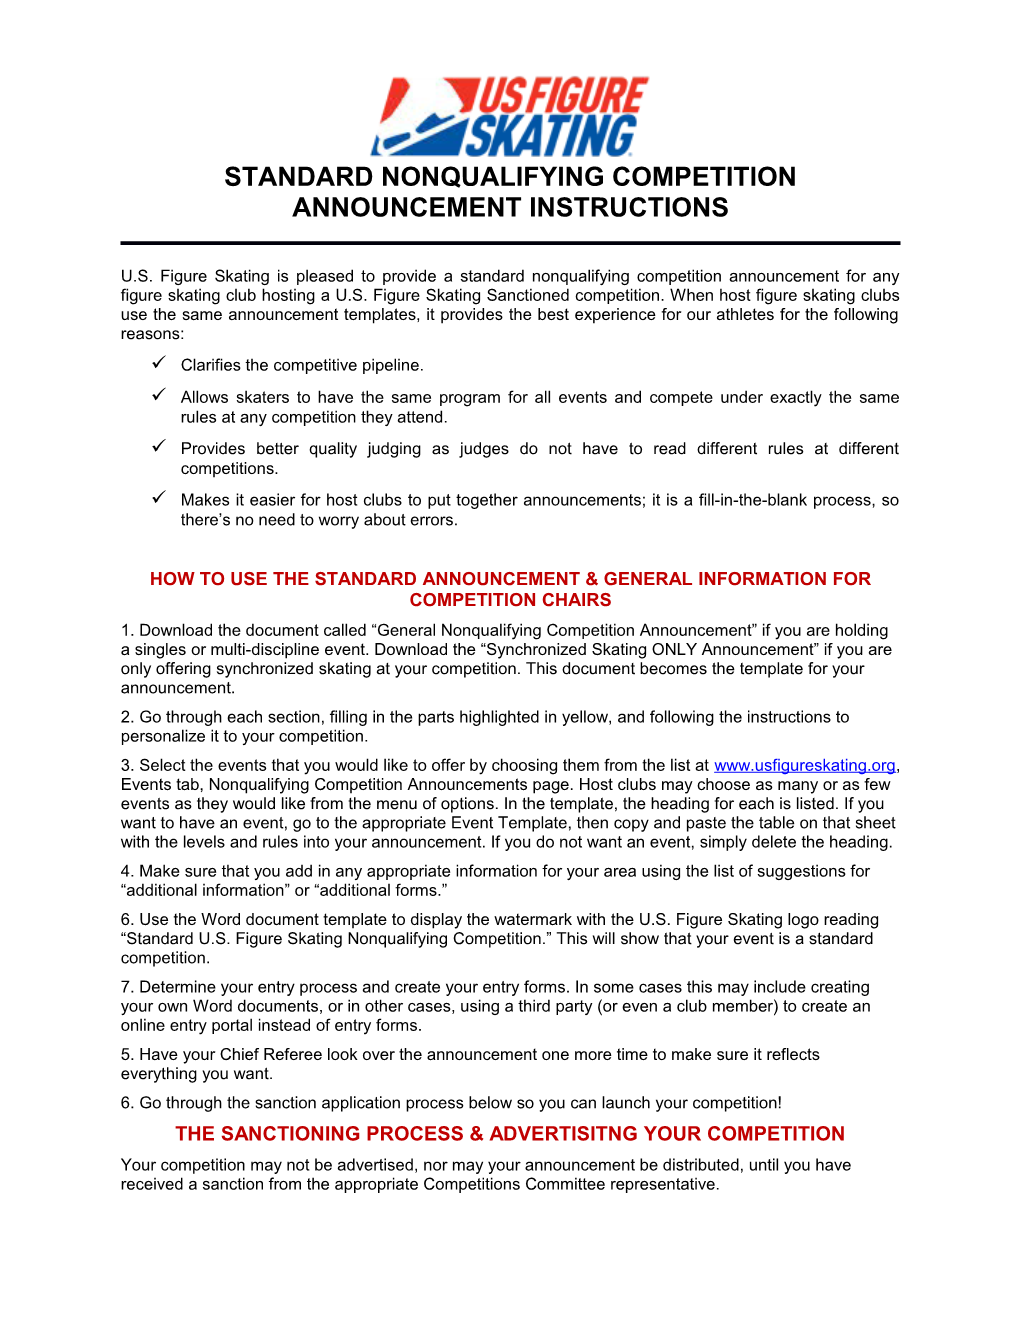 Standard Nonqualifying Competition Announcement Instructions